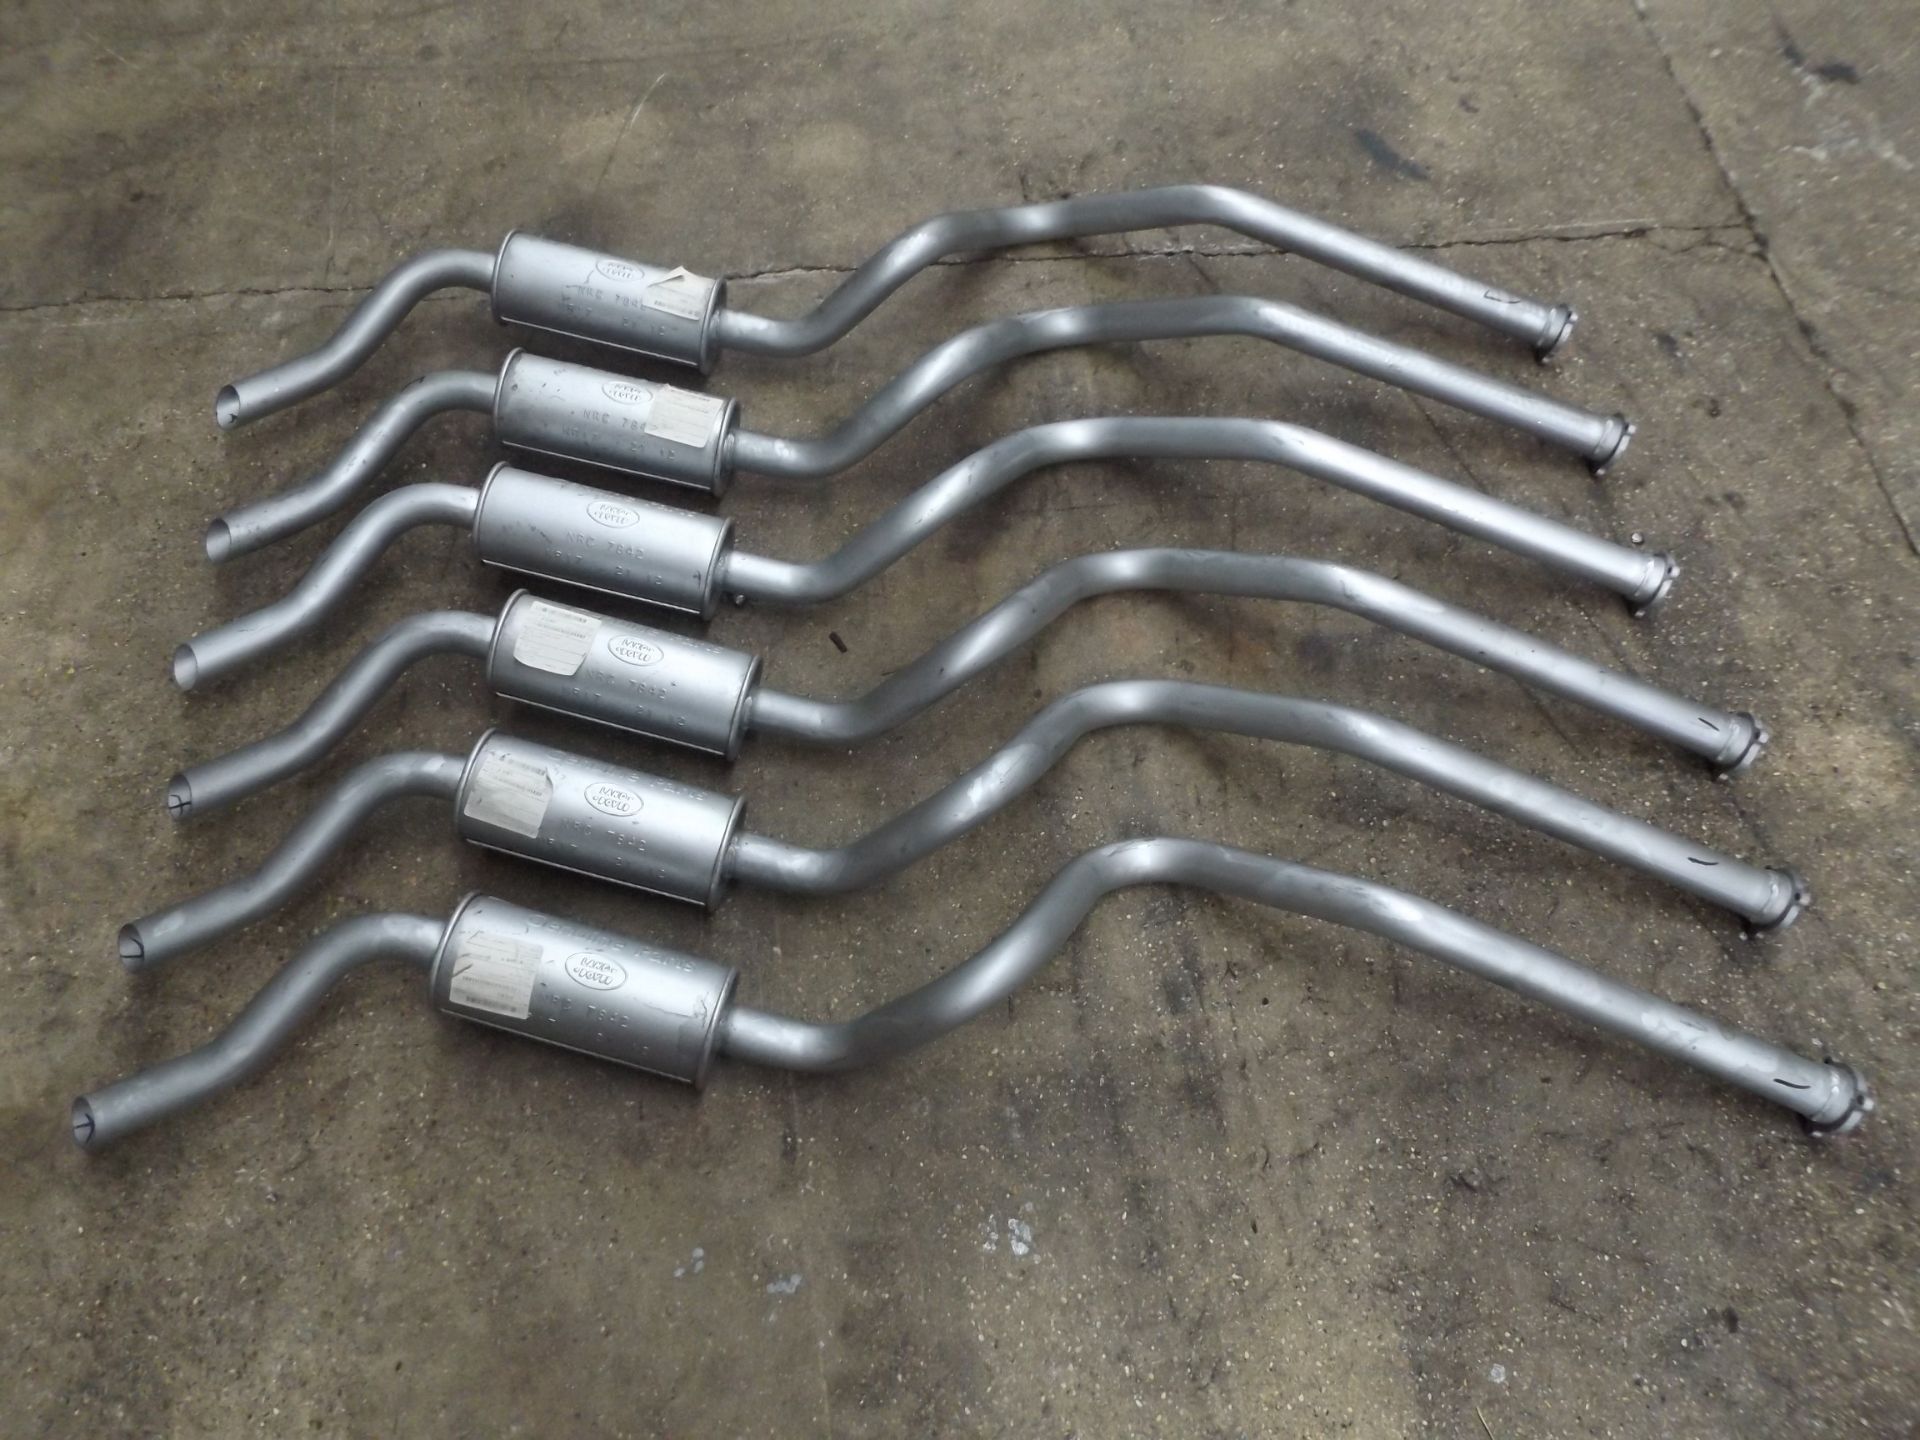 6 x Land Rover NRC7842 Rear Tailpipe and Silencer